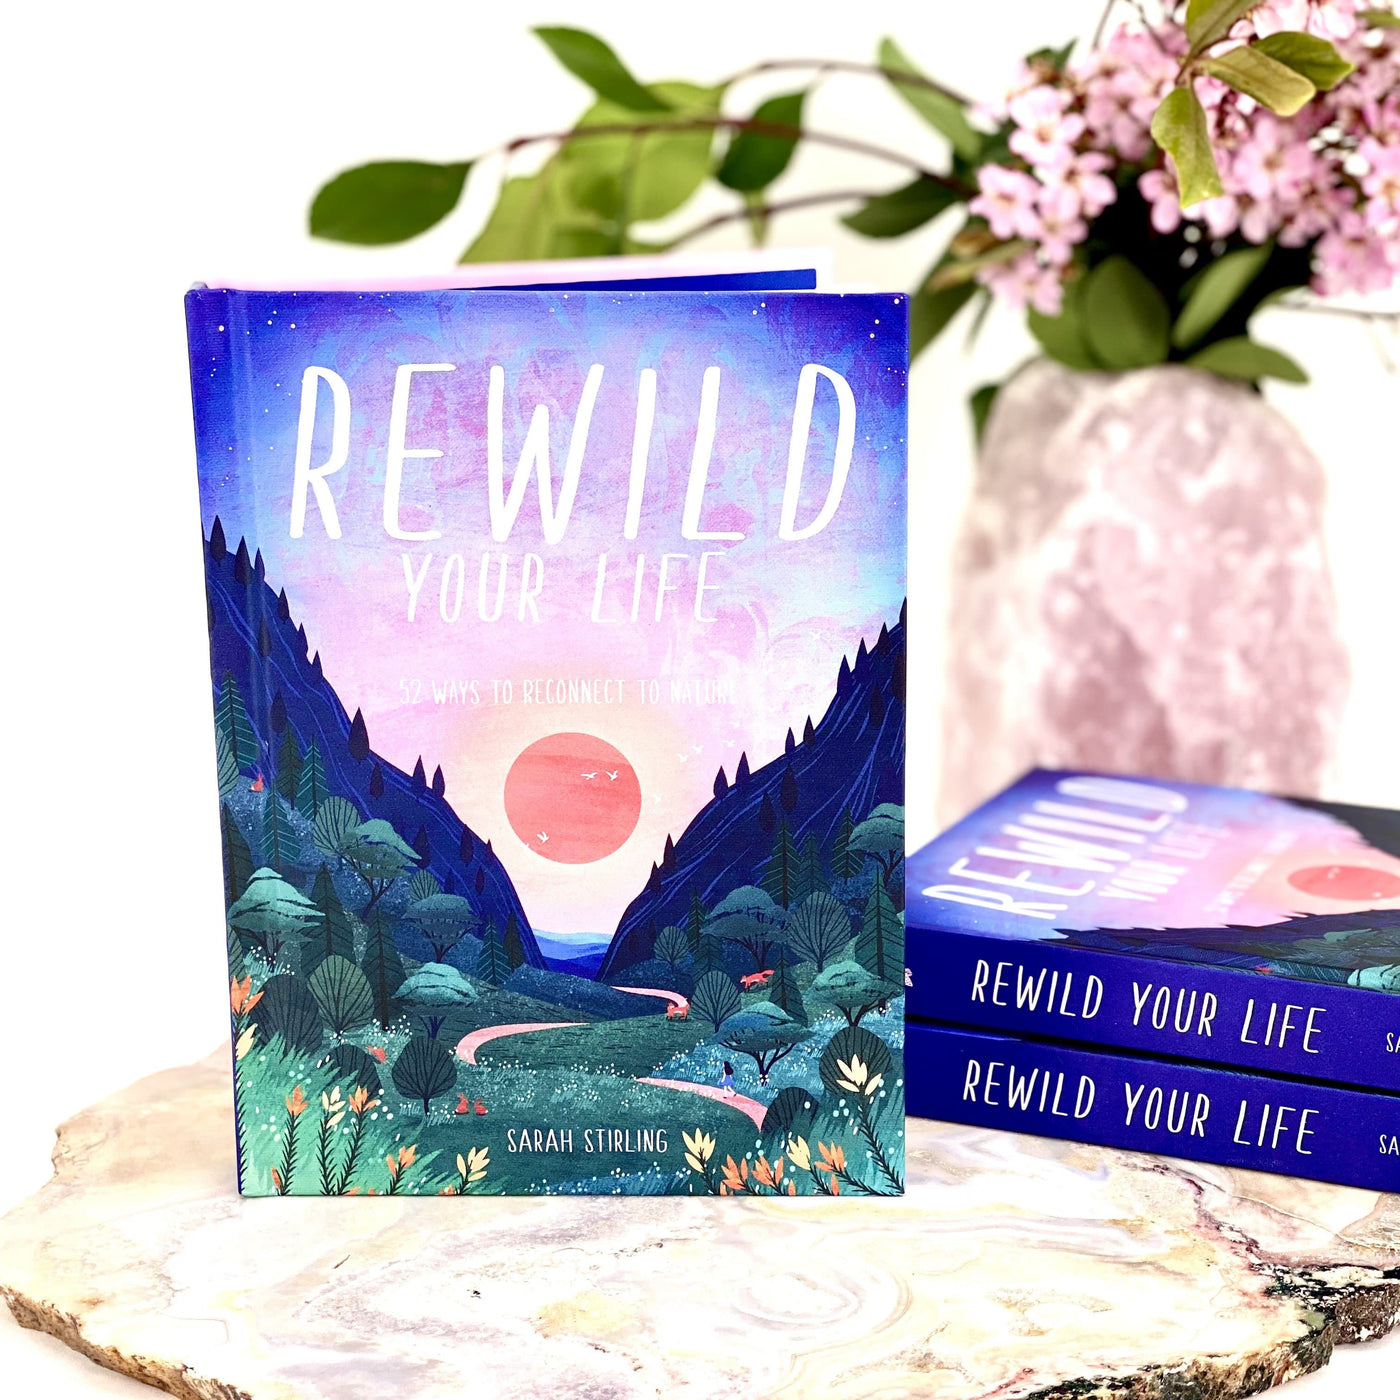 Rewild Your Life Book standing up next to a stack of 2 books with a crystal vase with flowers blurred in the background